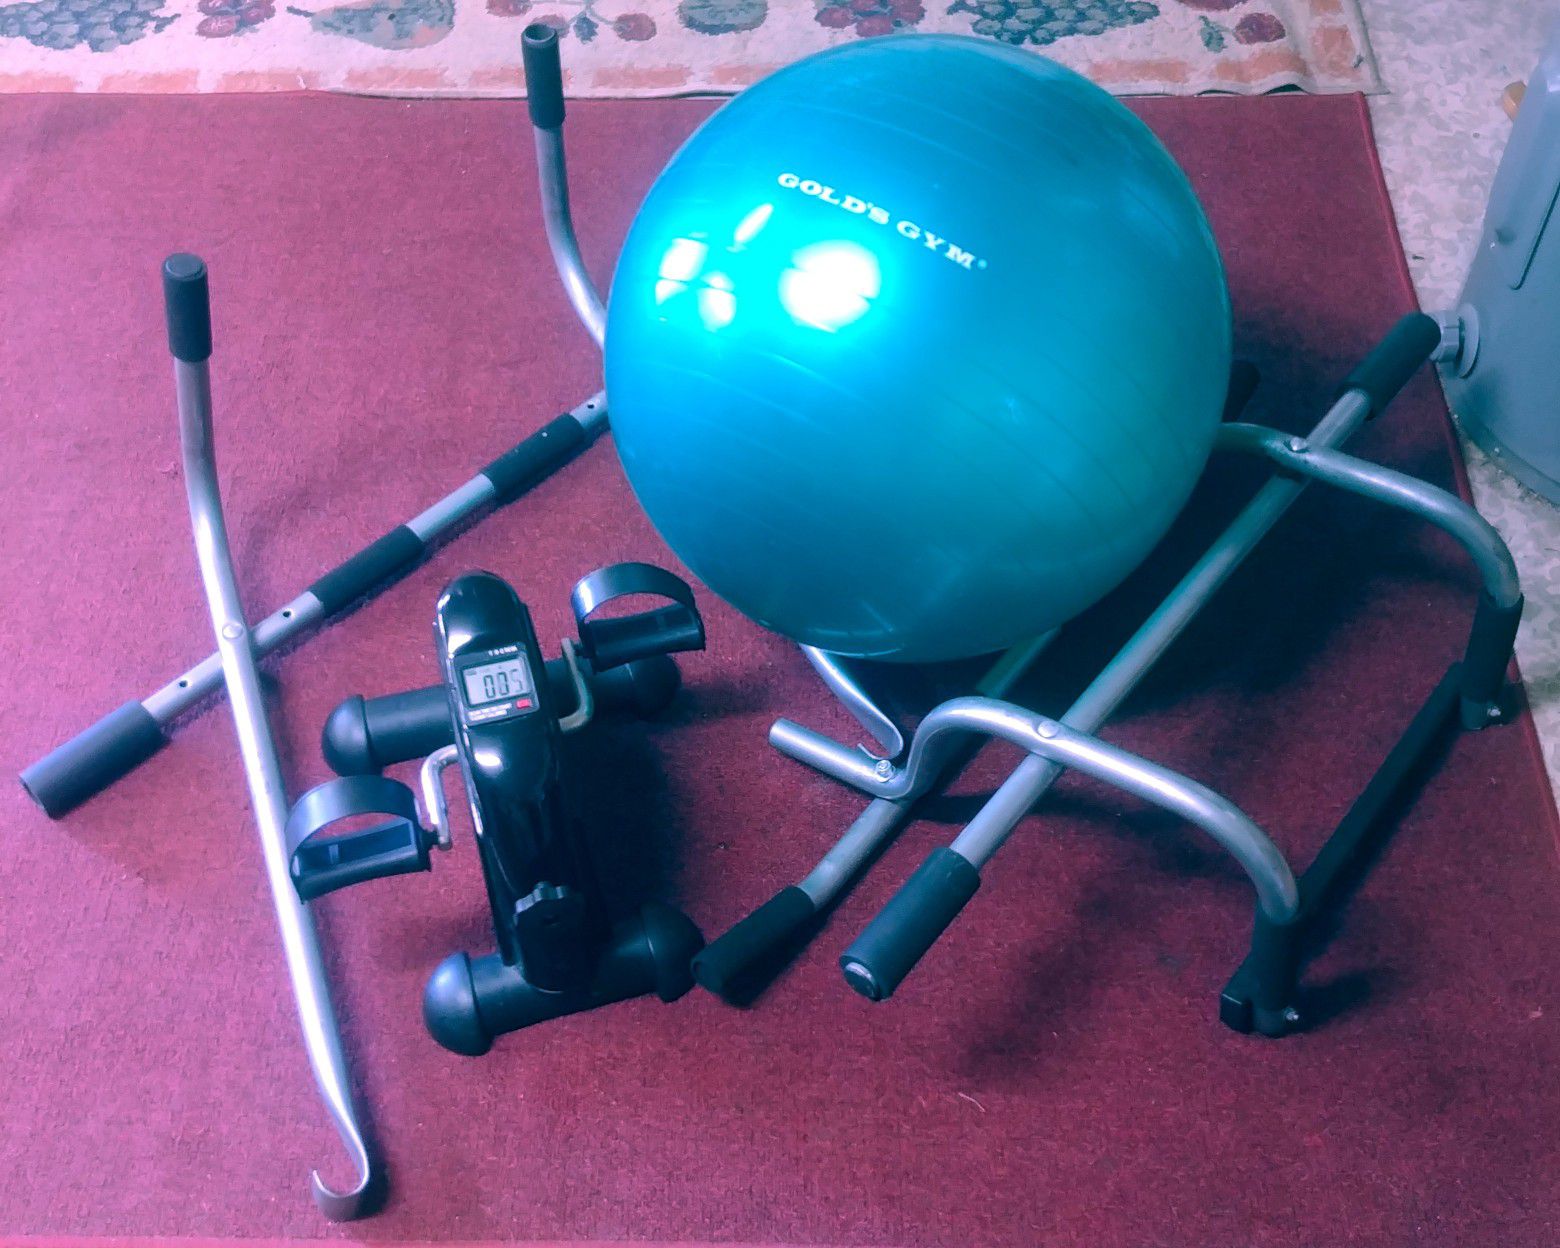 Exercise Ball Fitness Pedal Cycle & Pull up Chin up Bars